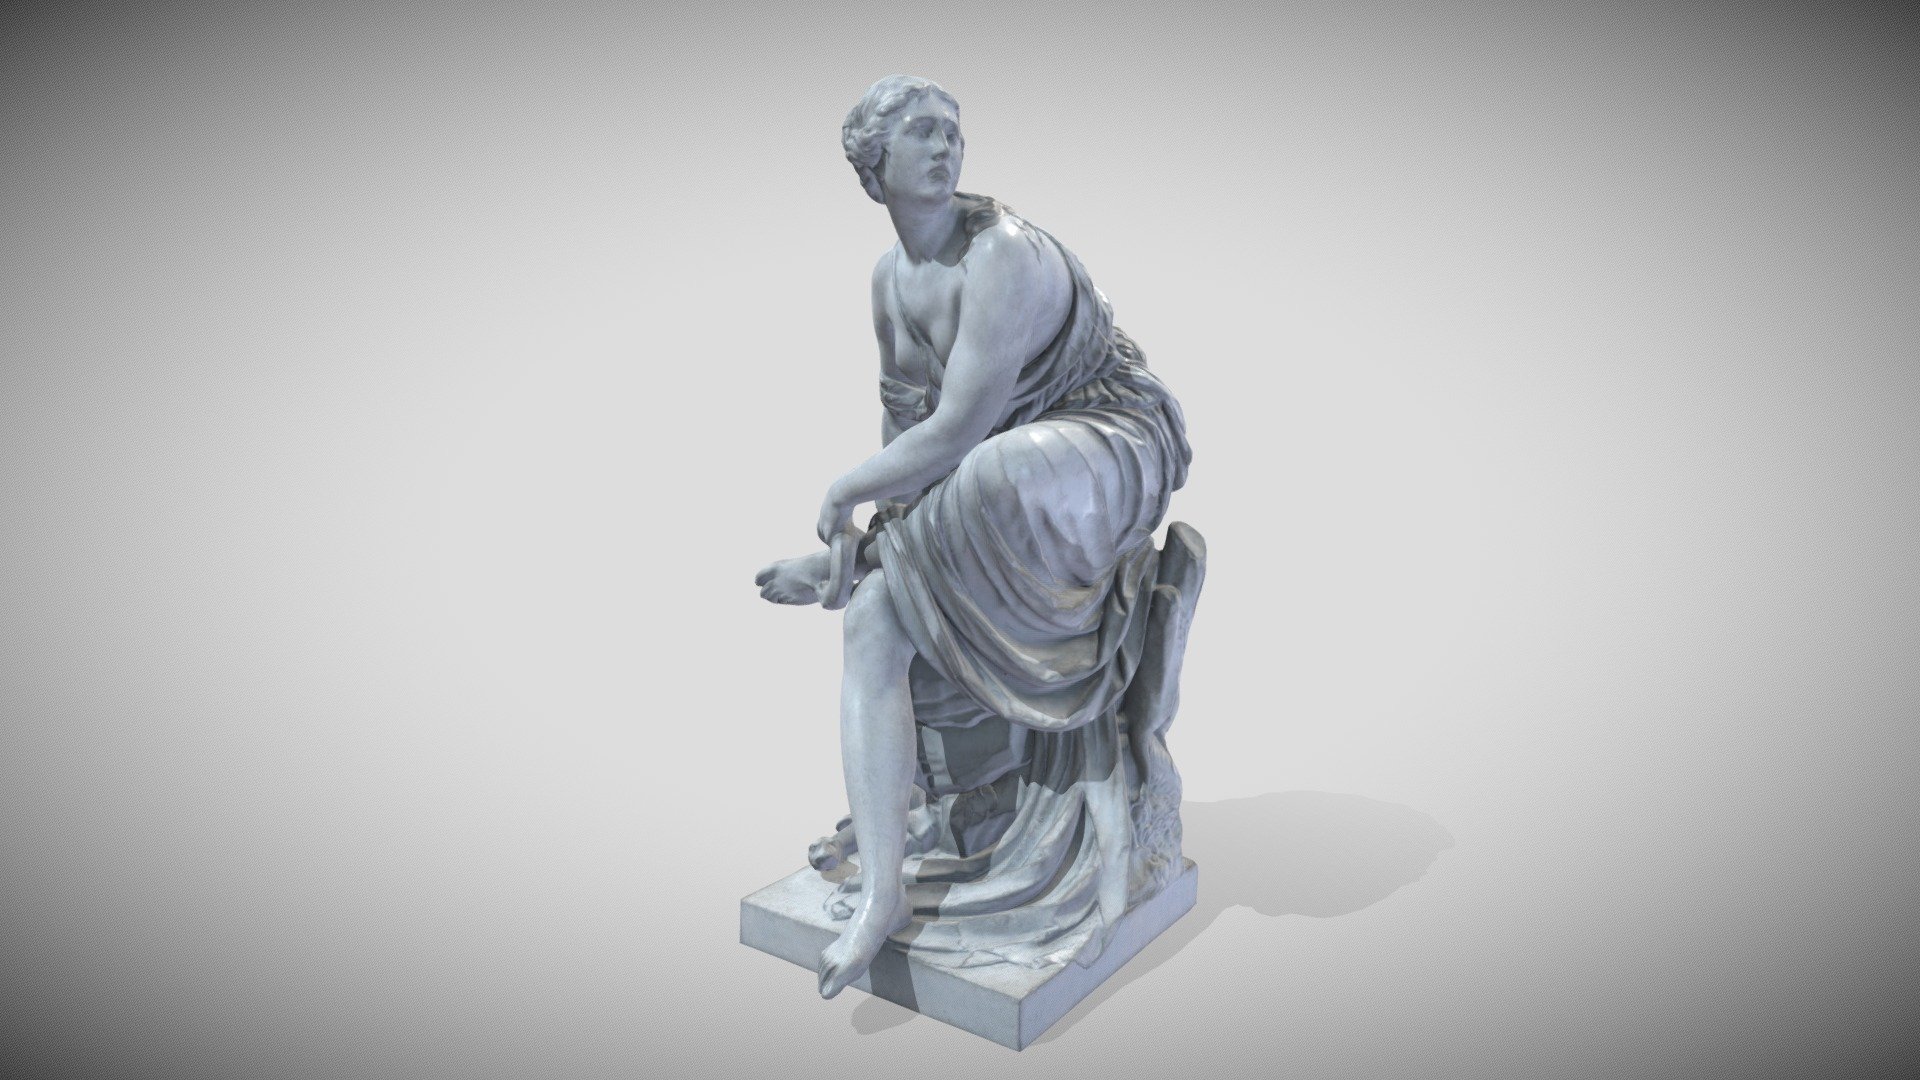 Original very nice 3D Scan from https://noe-3d.at/

here the Painted Gaming Version LR... 3d model